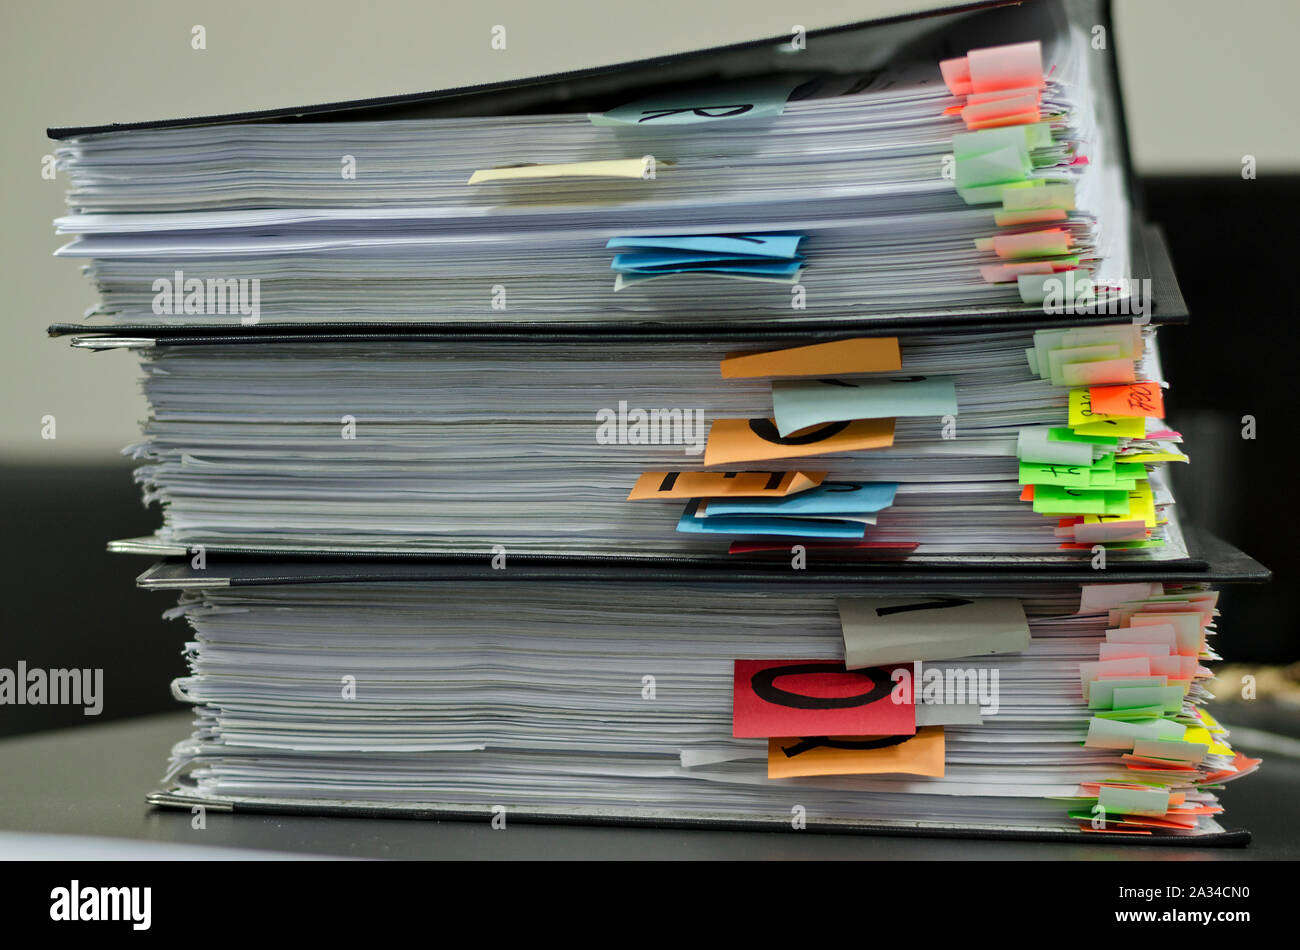 Extremely close up of the stacked office documents Stock Photo